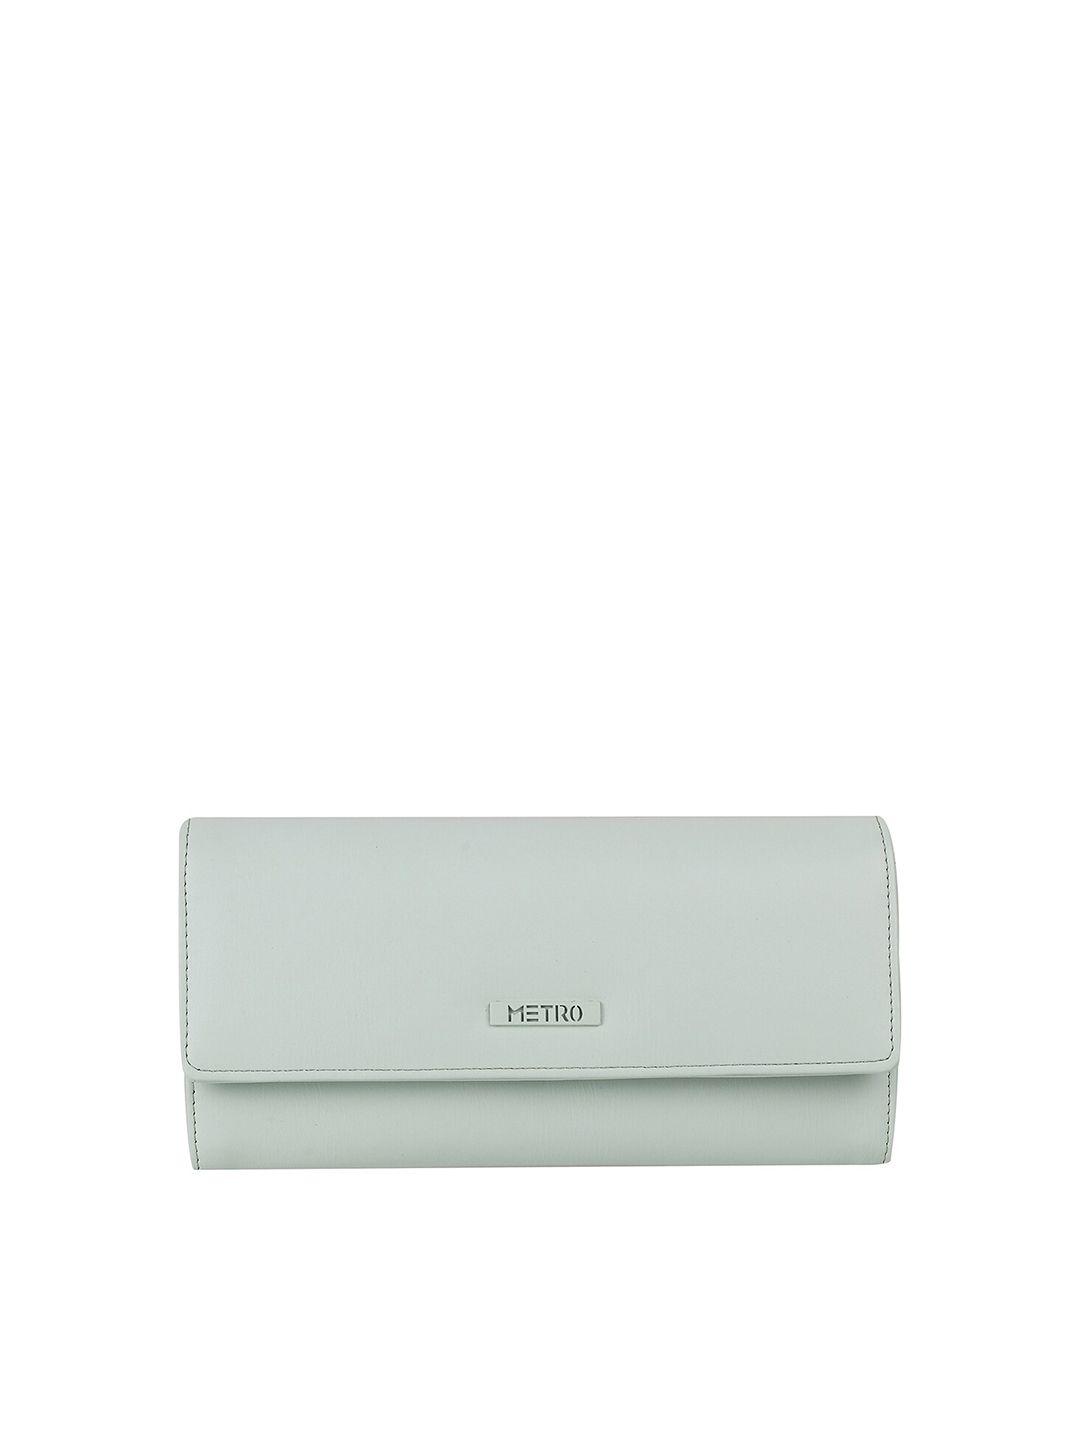 metro-women-three-fold-wallet-with-sd-card-holder